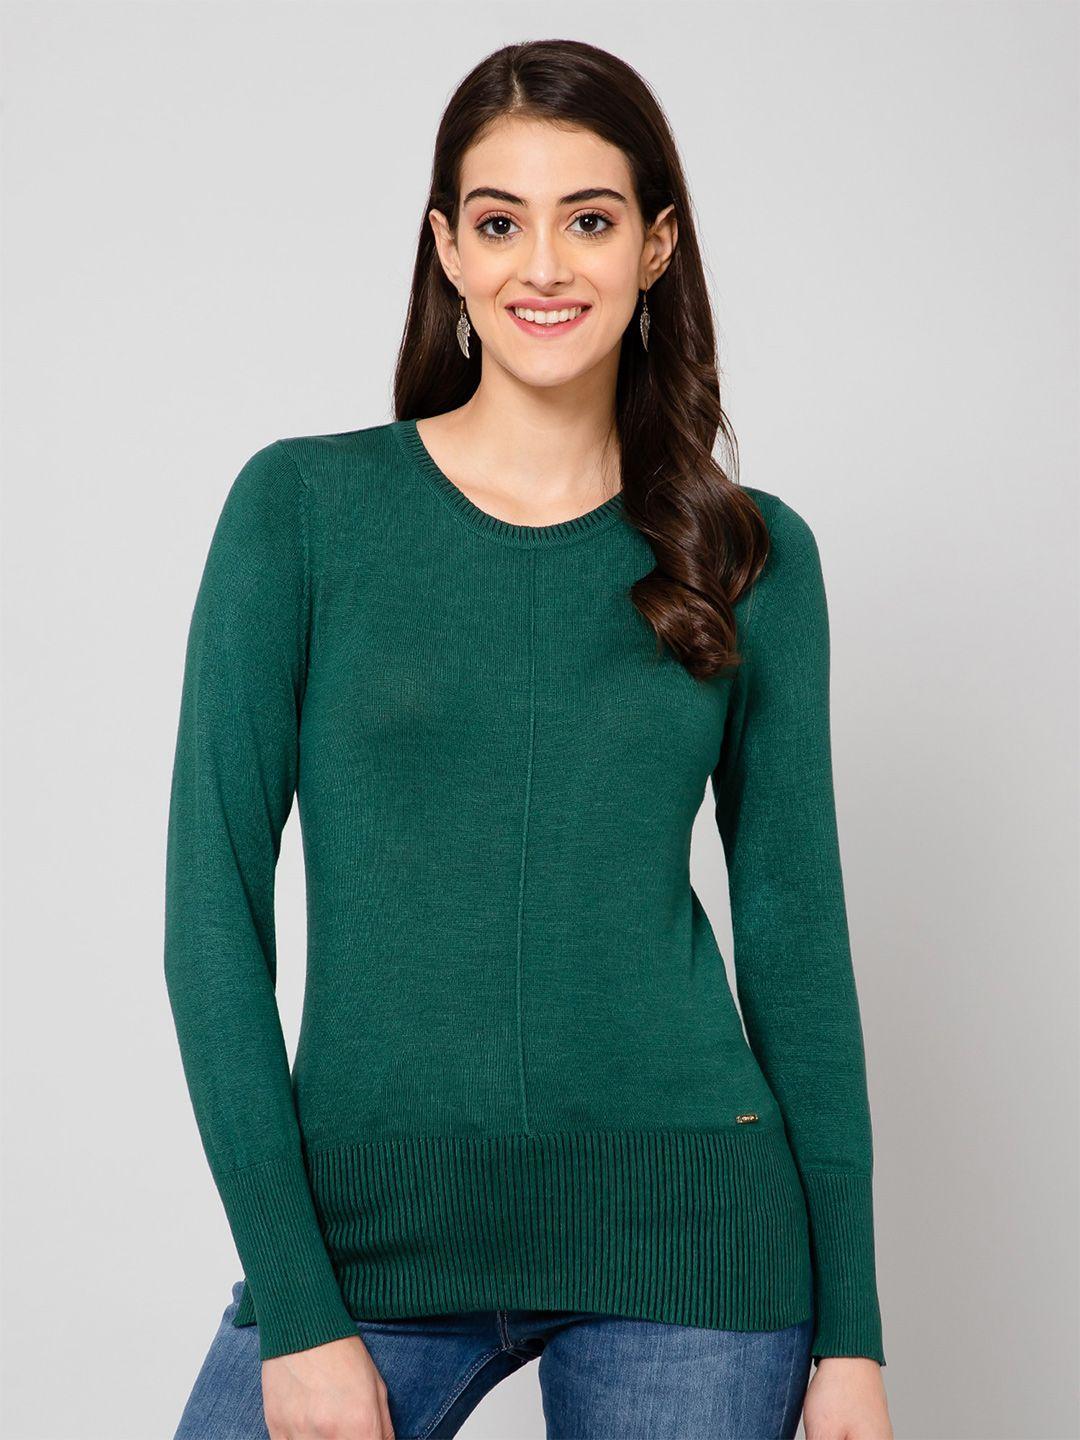 crozo-by-cantabil-women-round-neck-pullover-jumper-dress